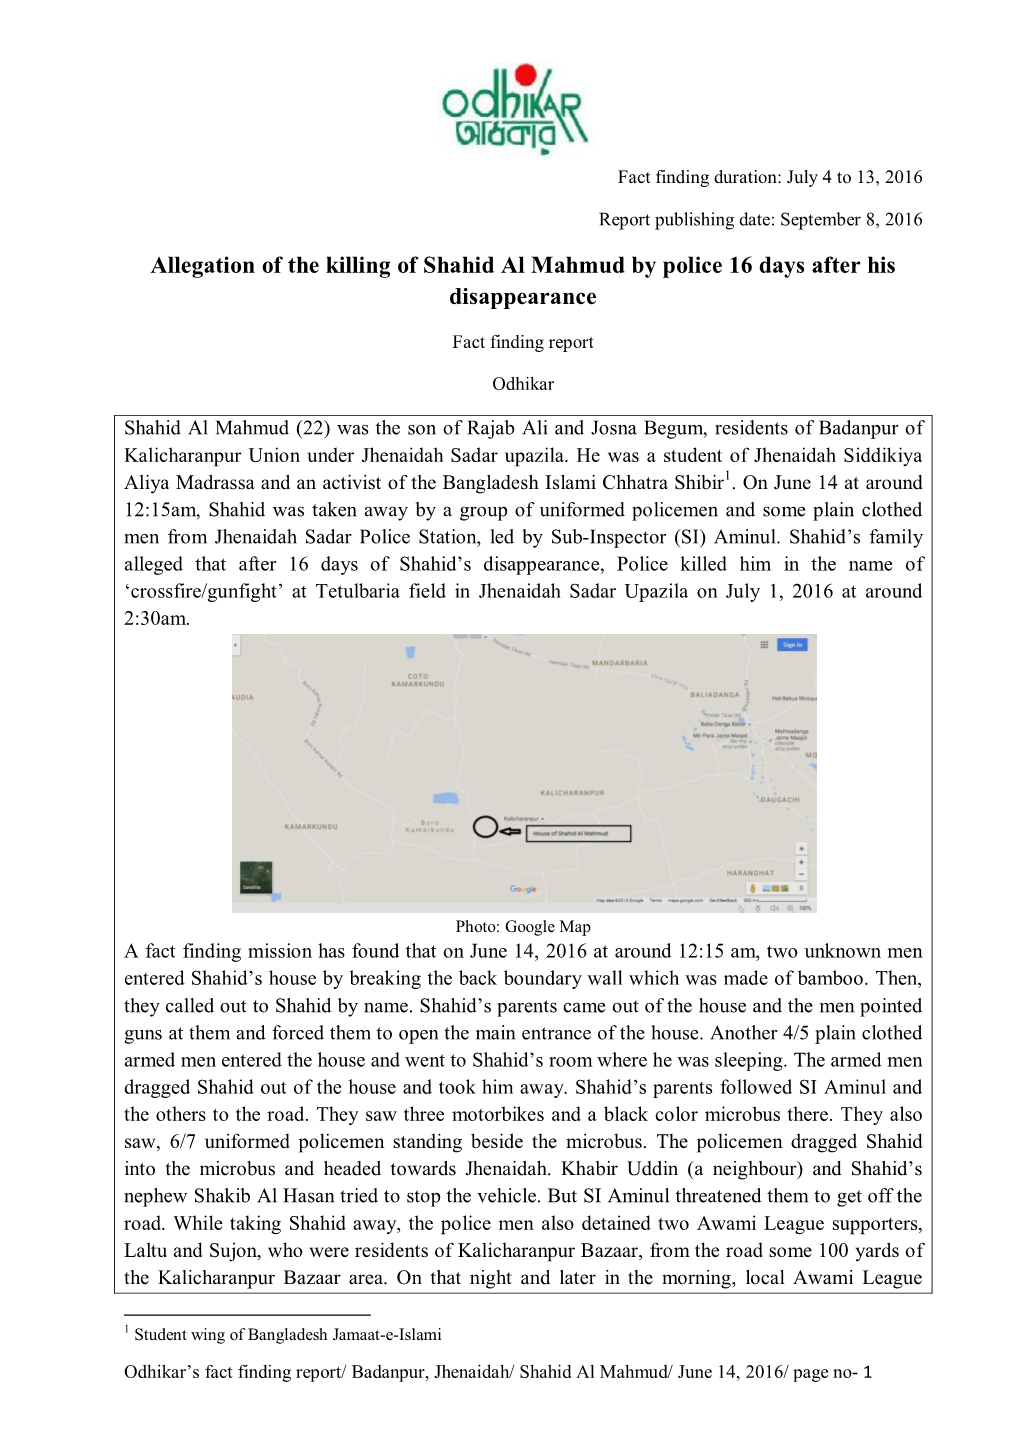 Allegation of the Killing of Shahid Al Mahmud by Police 16 Days After His Disappearance